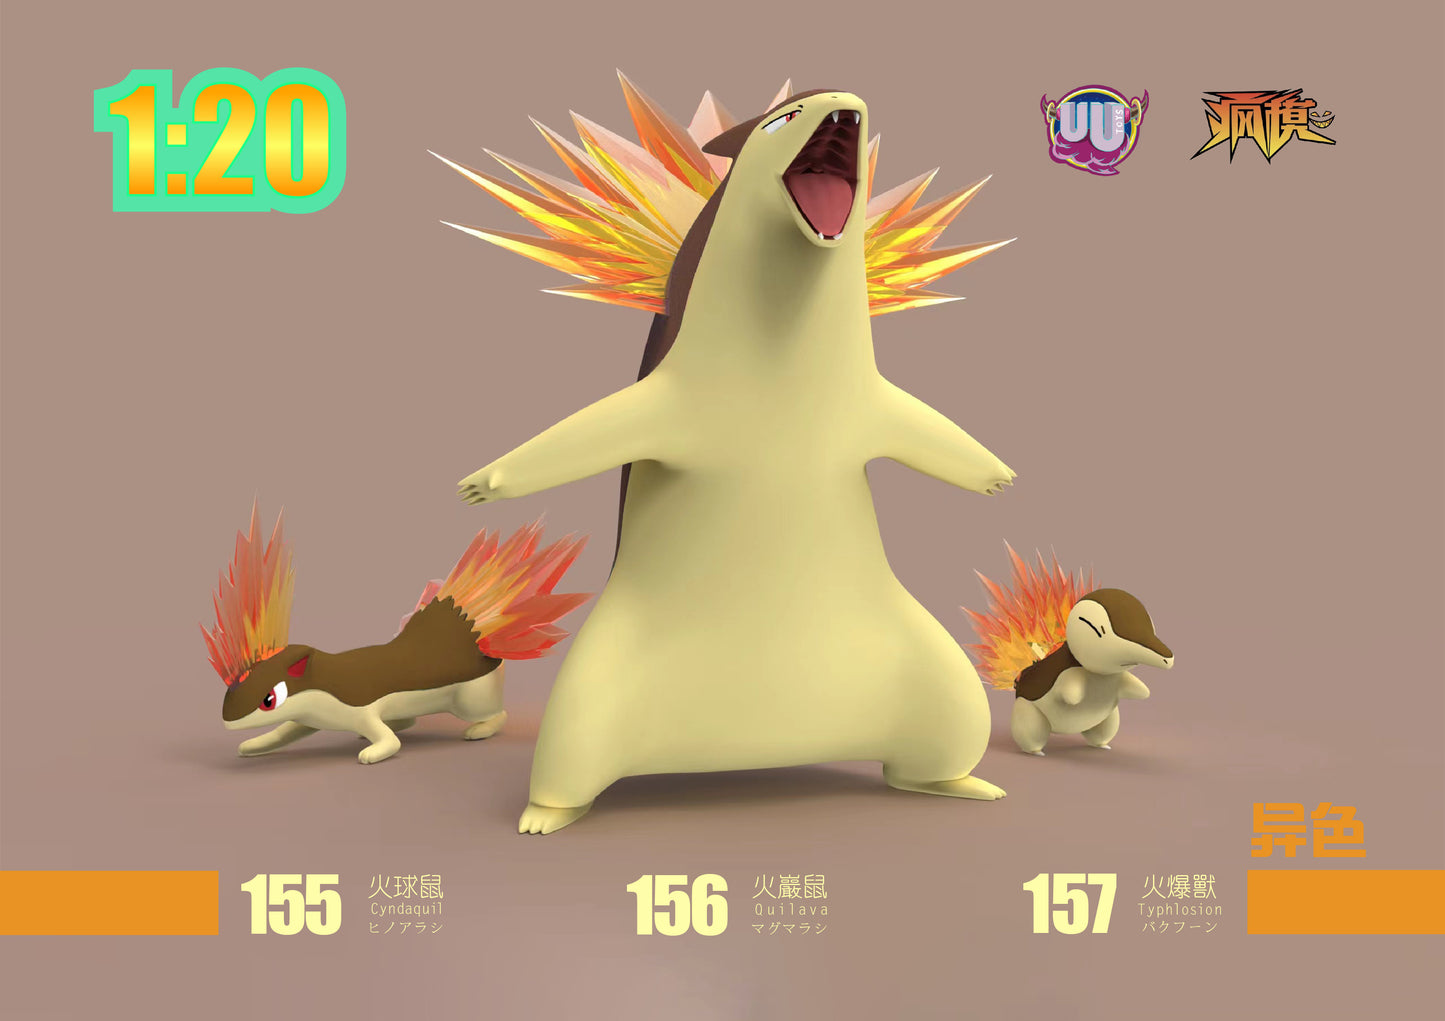 [PREORDER] 1/20 Scale World Figure [UU] - Cyndaquil & Quilava & Typhlosion